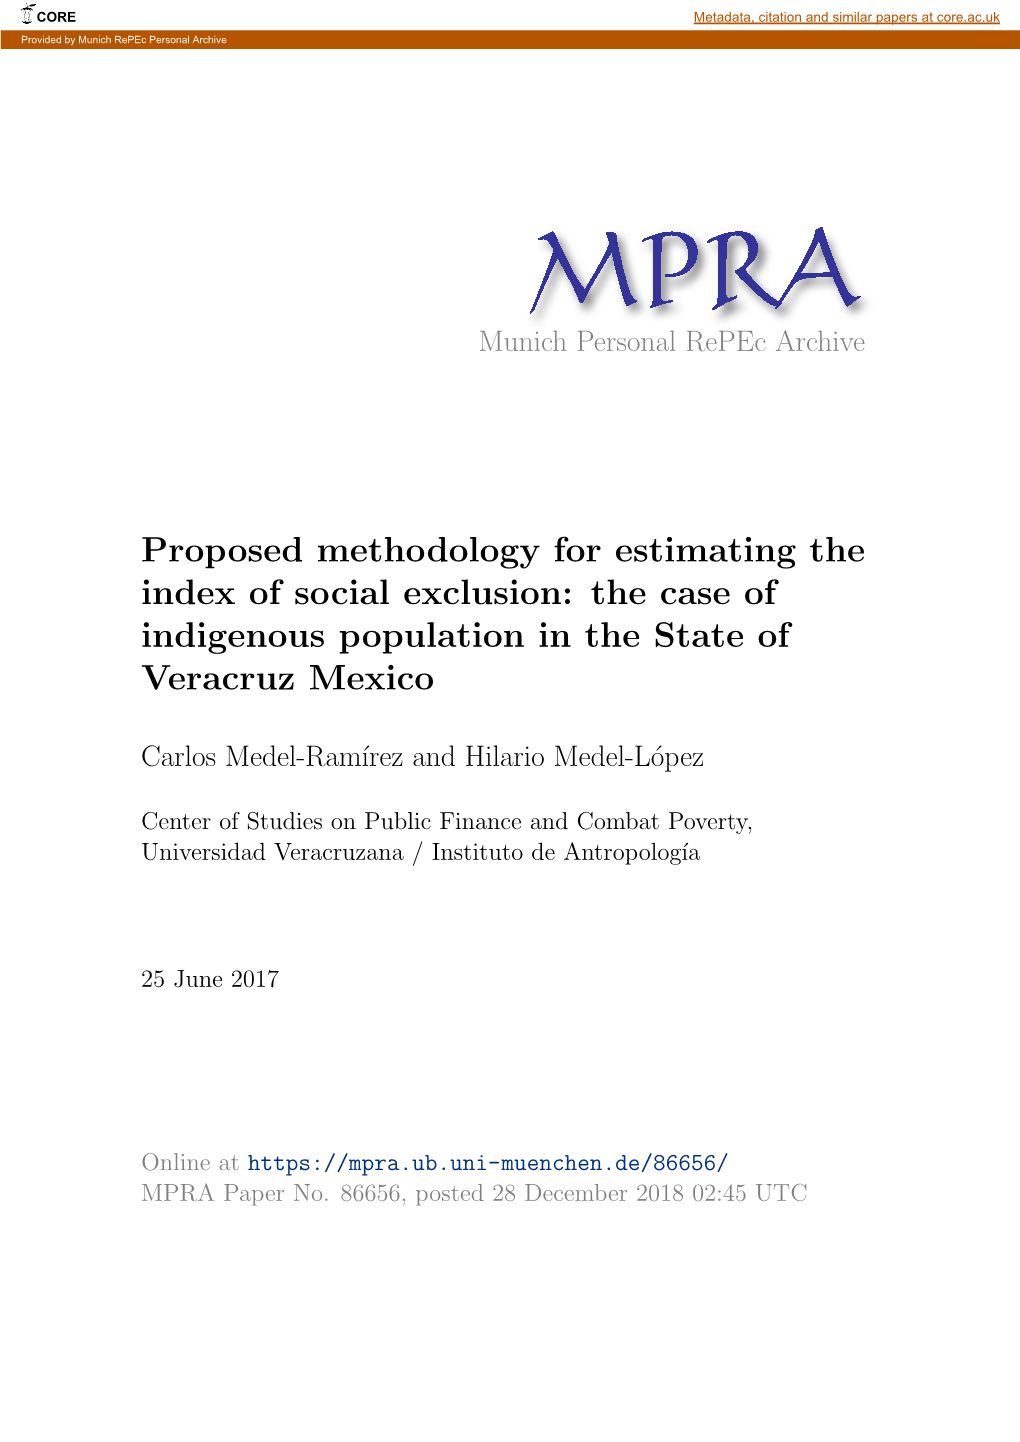 Proposed Methodology for Estimating the Index of Social Exclusion: the Case of Indigenous Population in the State of Veracruz Mexico